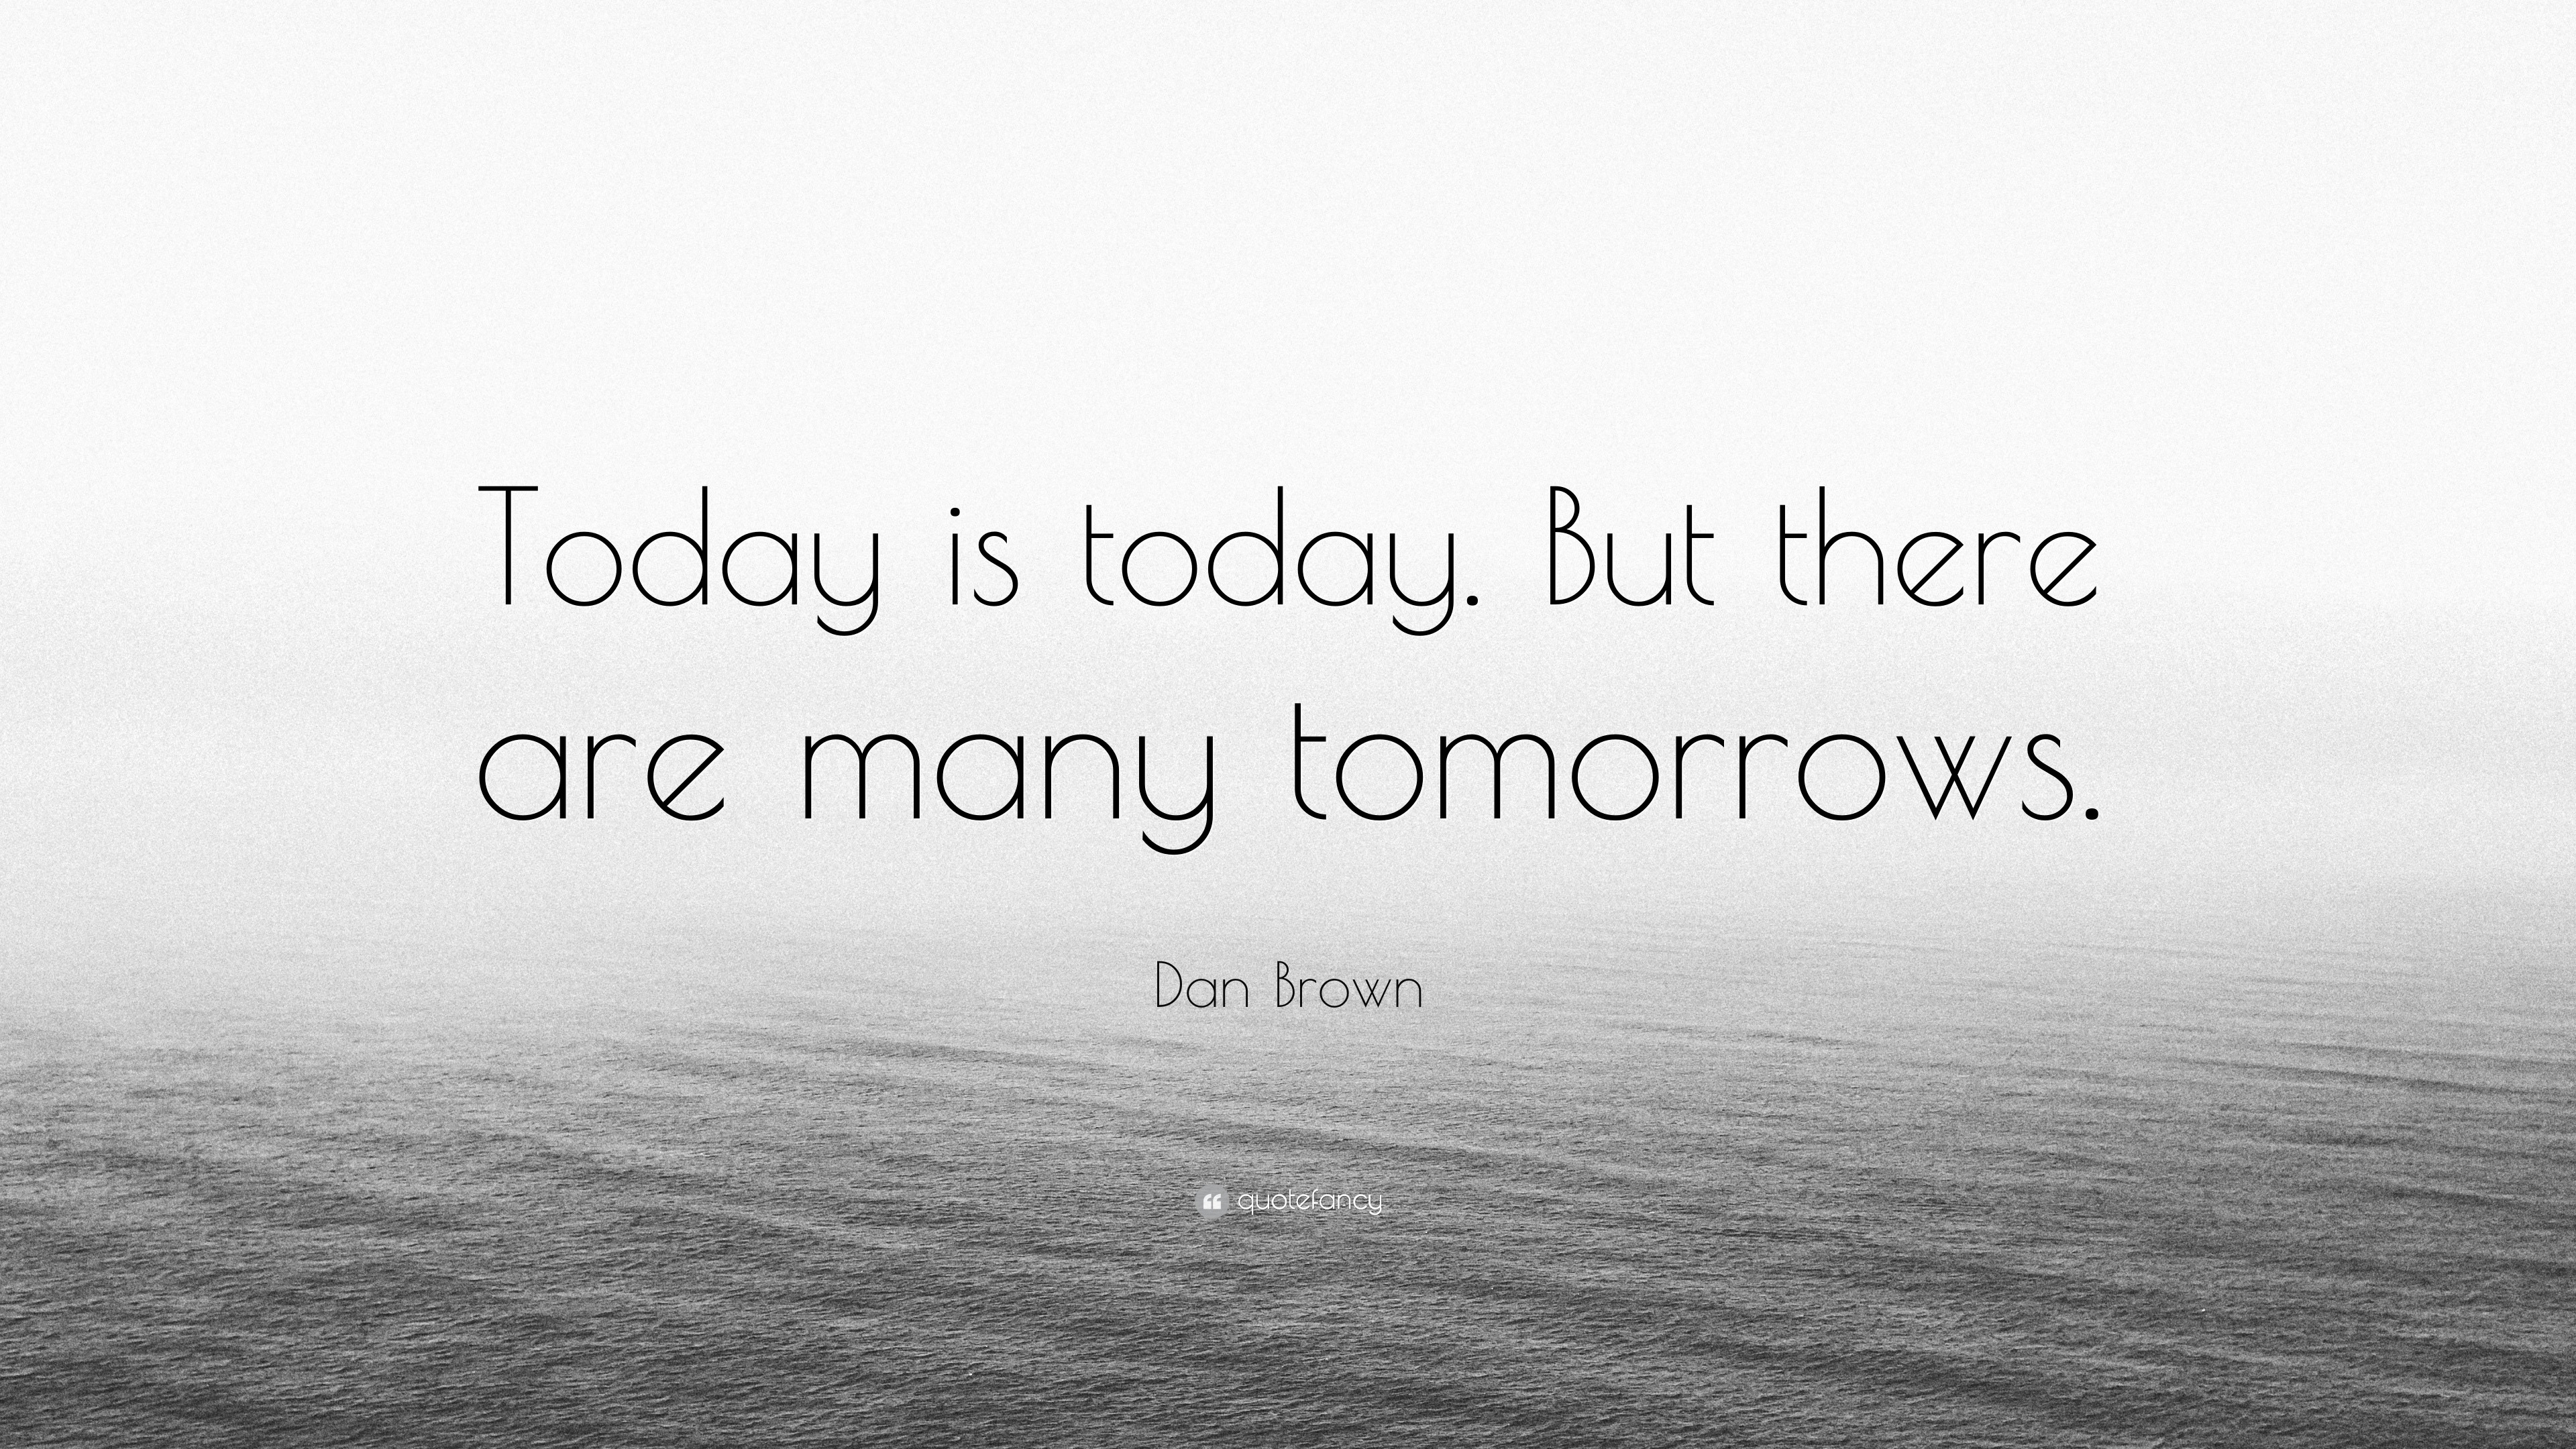 Dan Brown Quote: “Today is today. But there are many tomorrows.”